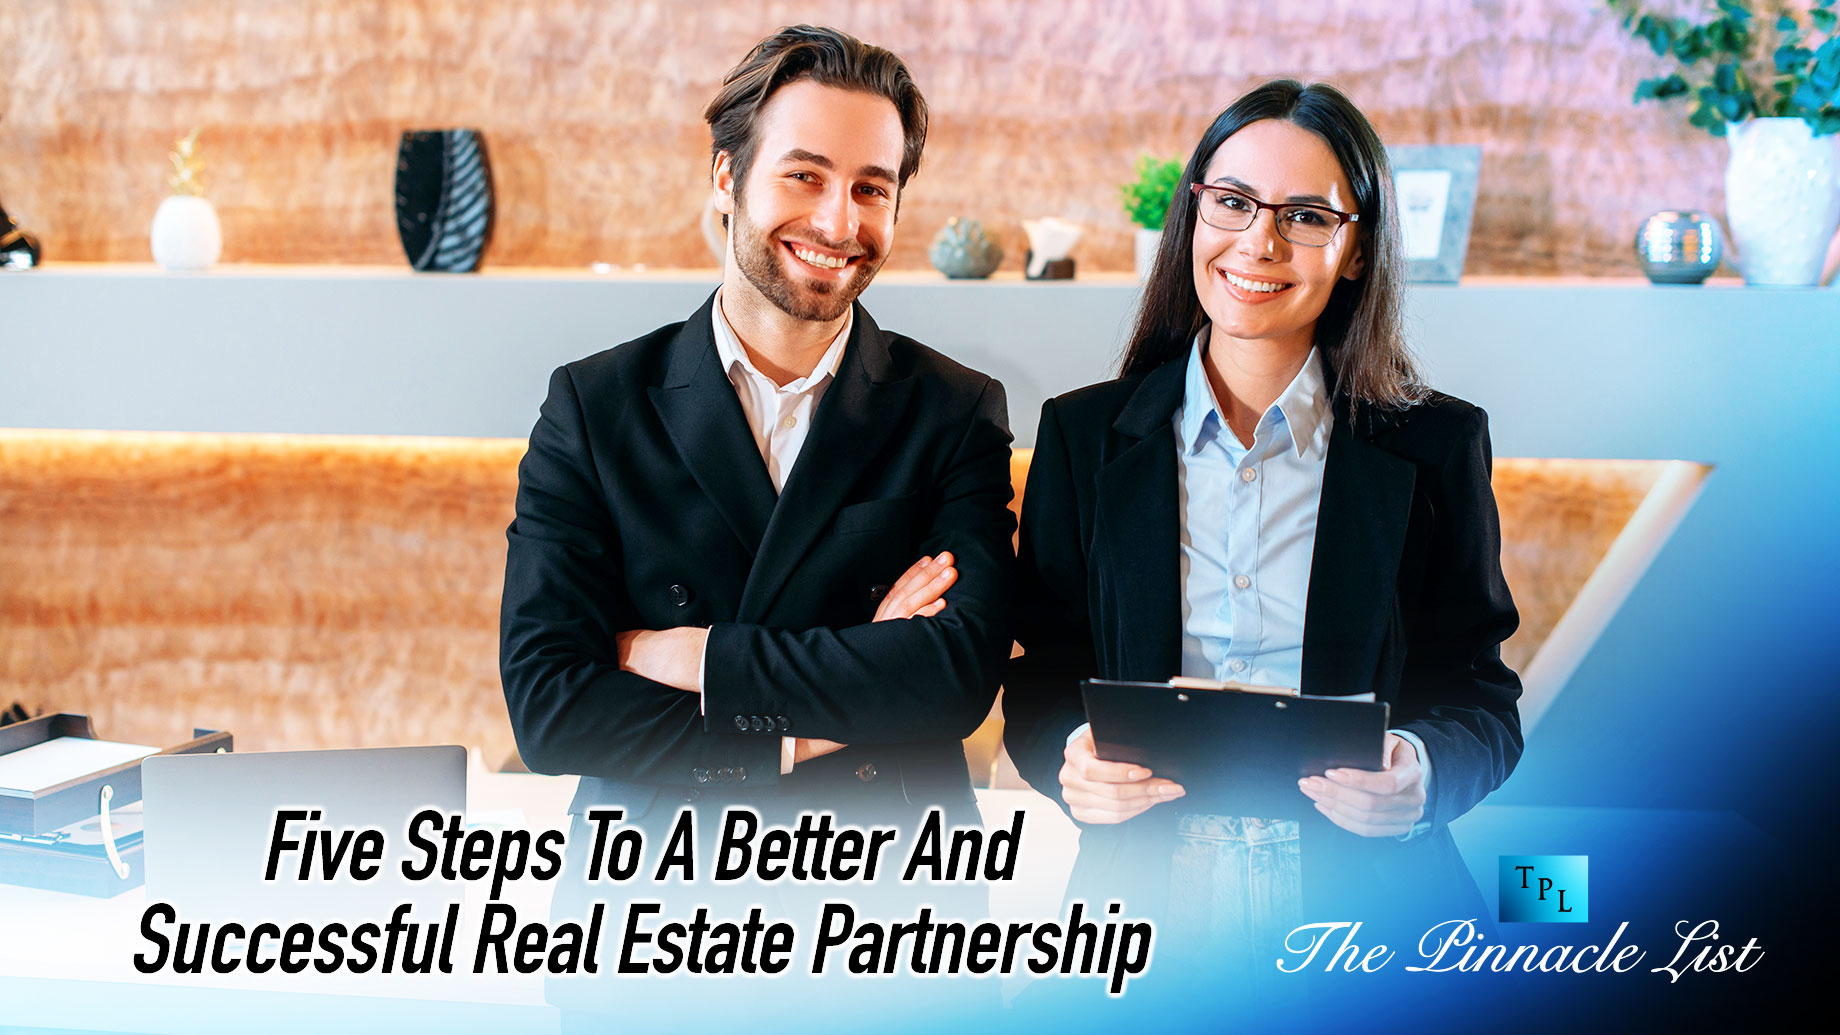 Five Steps To A Better And Successful Real Estate Partnership